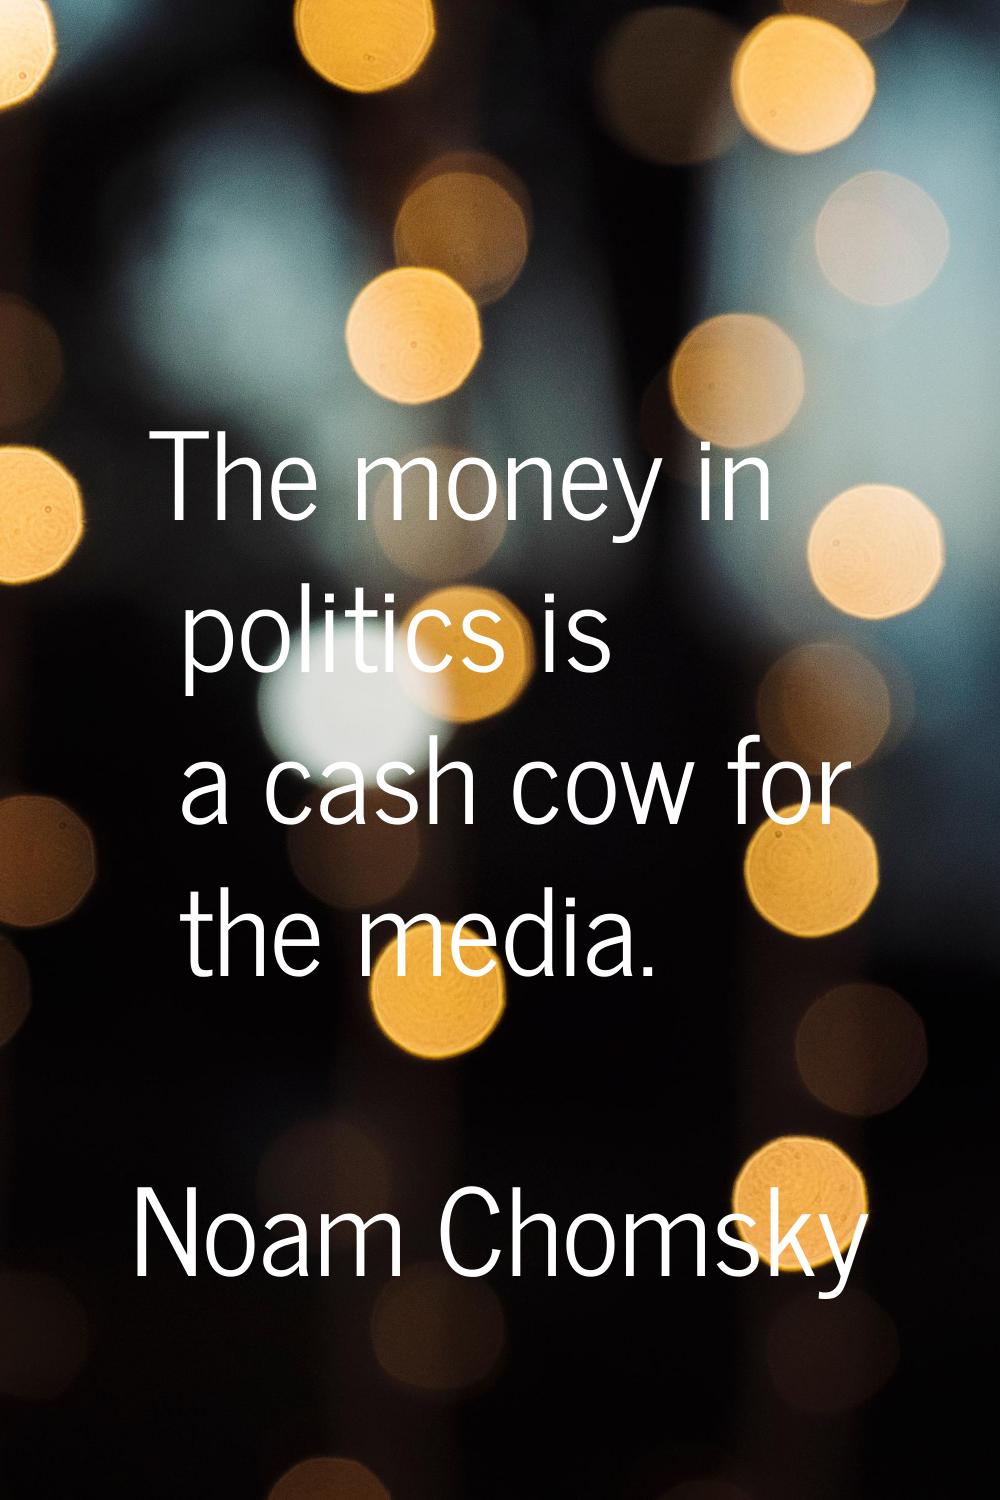 The money in politics is a cash cow for the media.